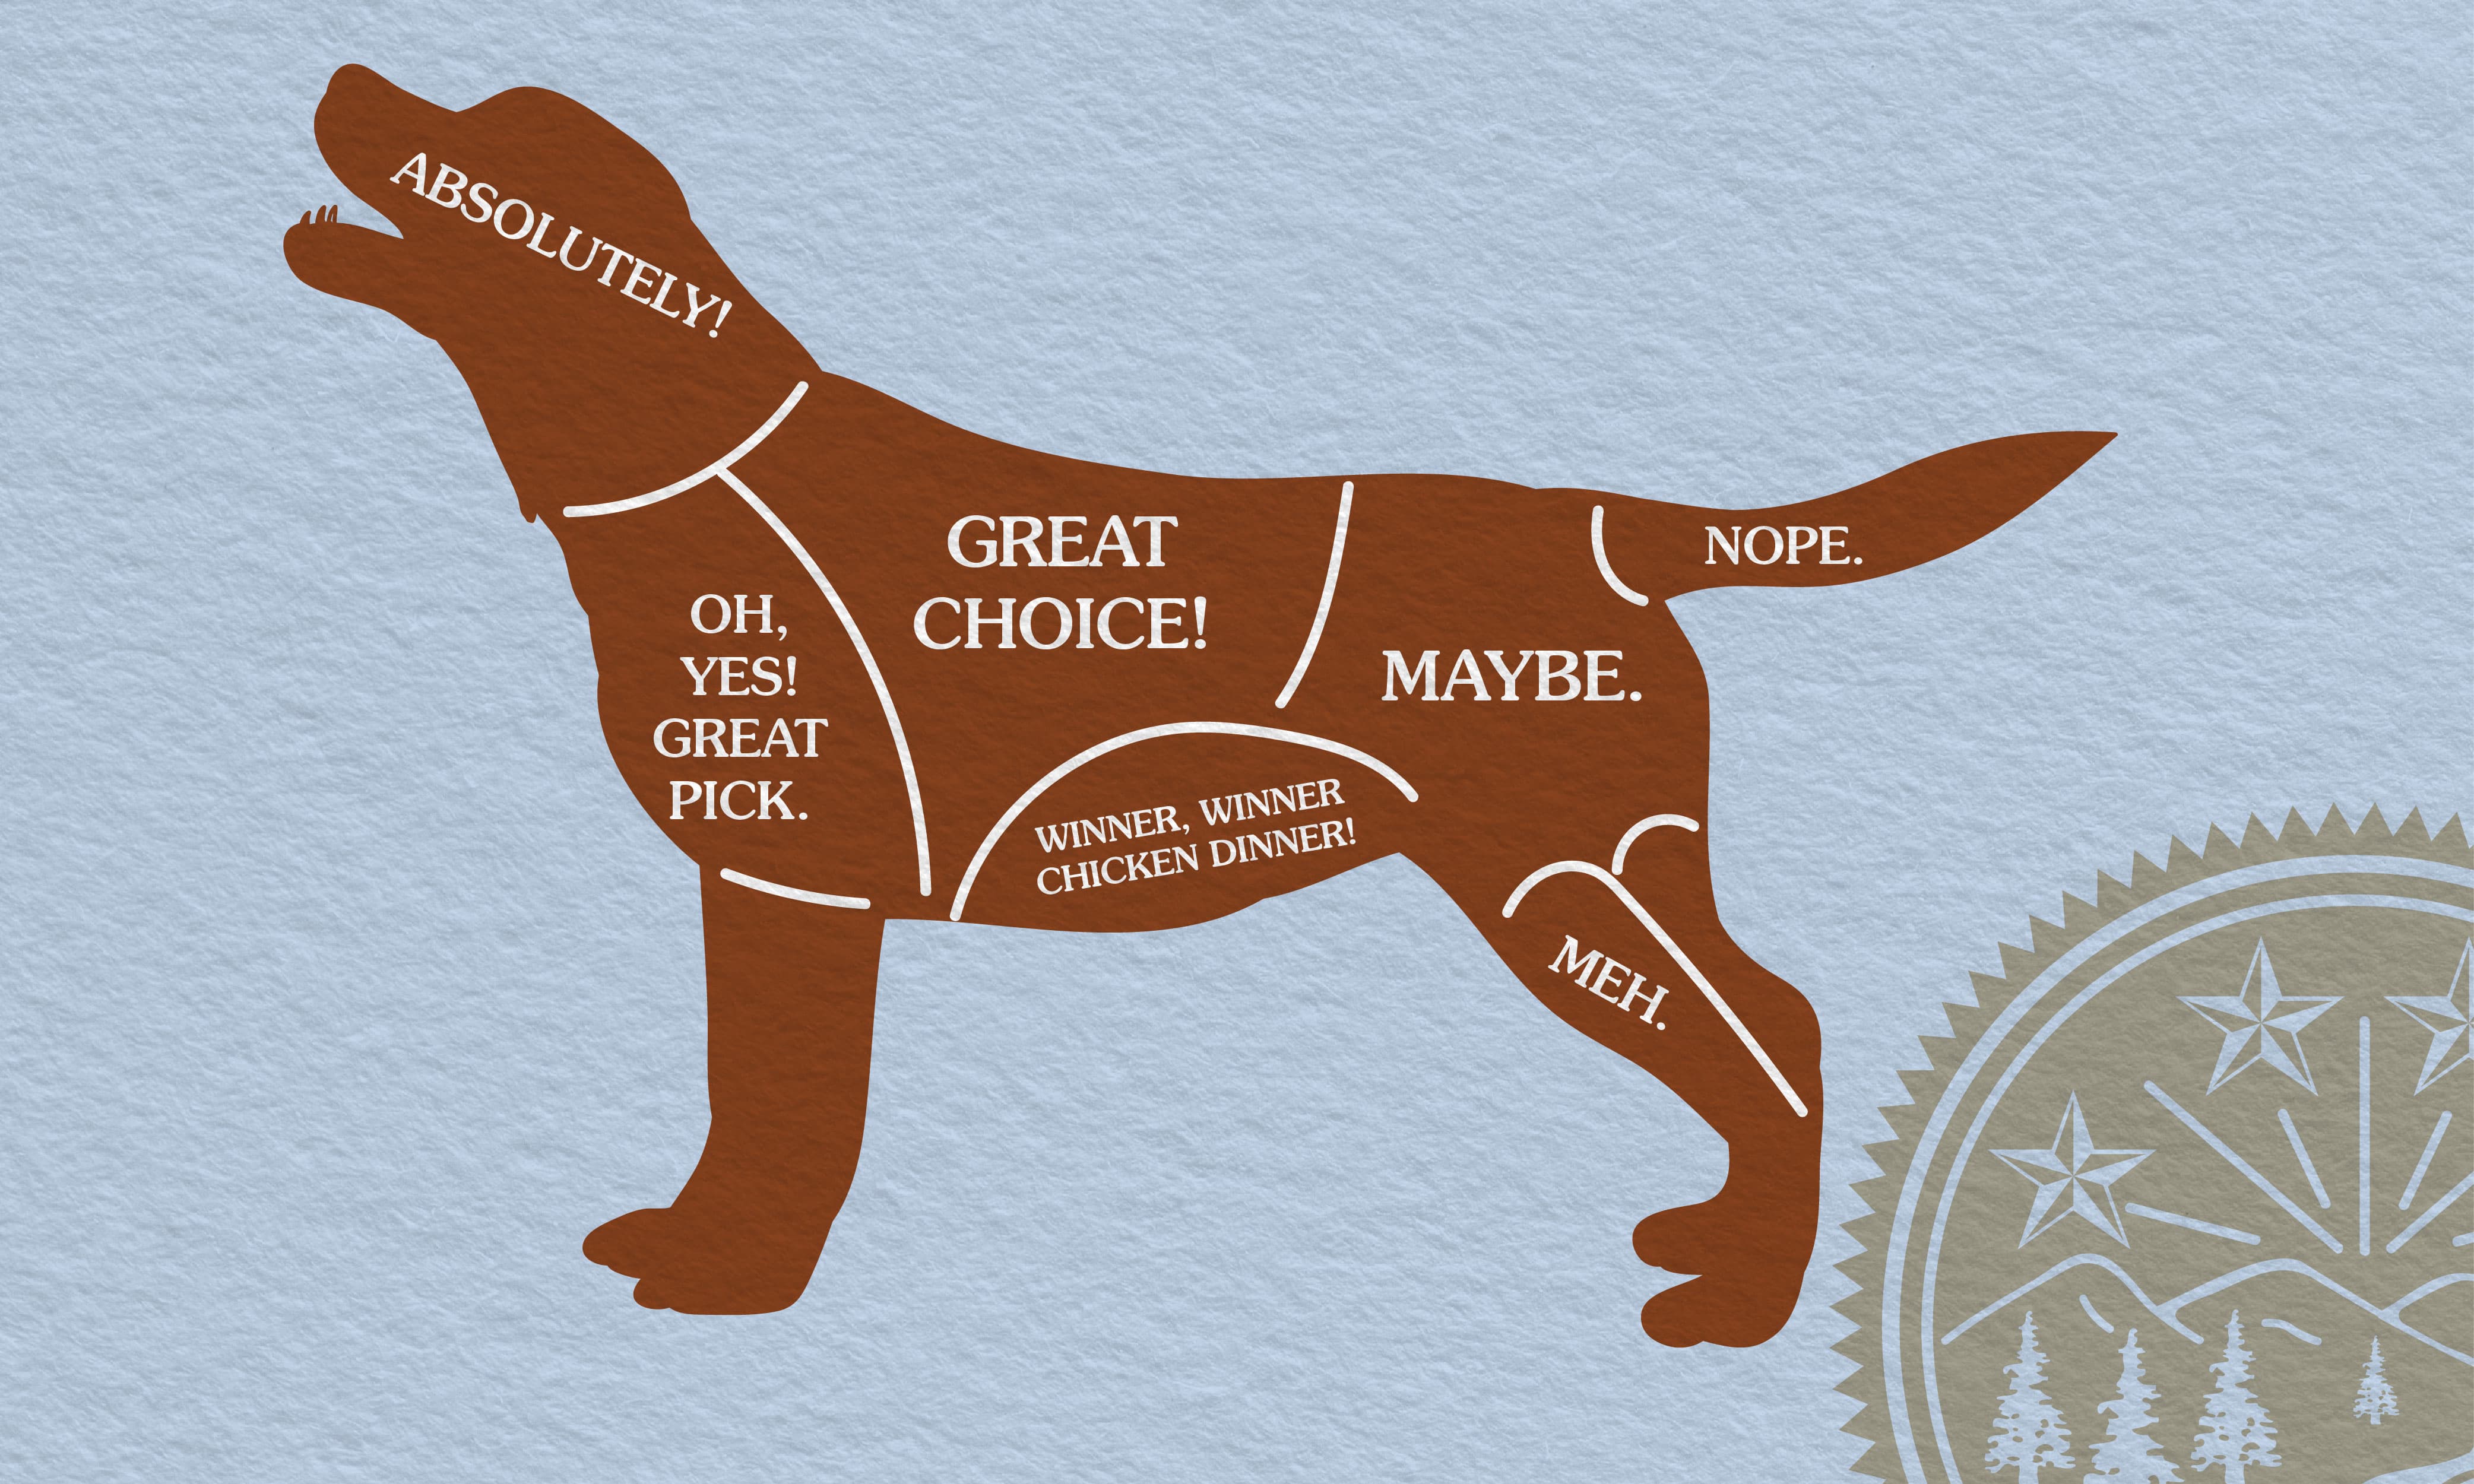 An infographic detailing which spots on a dog are okay to pet and which spots are not okay.